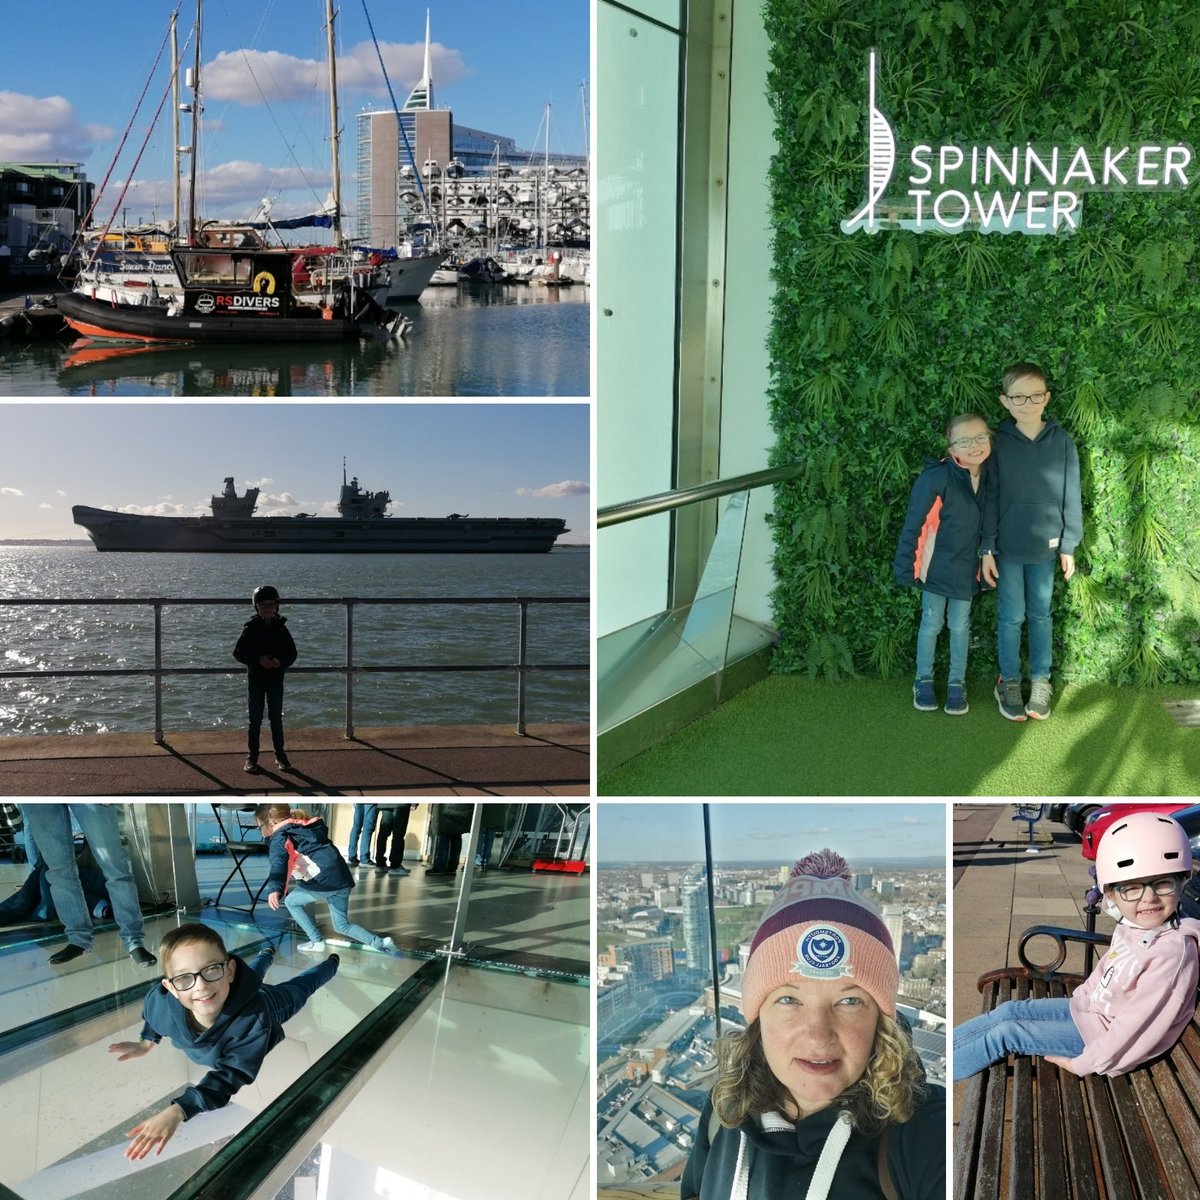 A beautiful day, in my favourite place with two little beauties! Climbing high up the Spinnaker Tower, conquering fears and drinking tea within the sky cafe together!! 😍☀️🚢⚓ #alfiebear #betsyboo #mummyclaris #portsmouthlover #pup